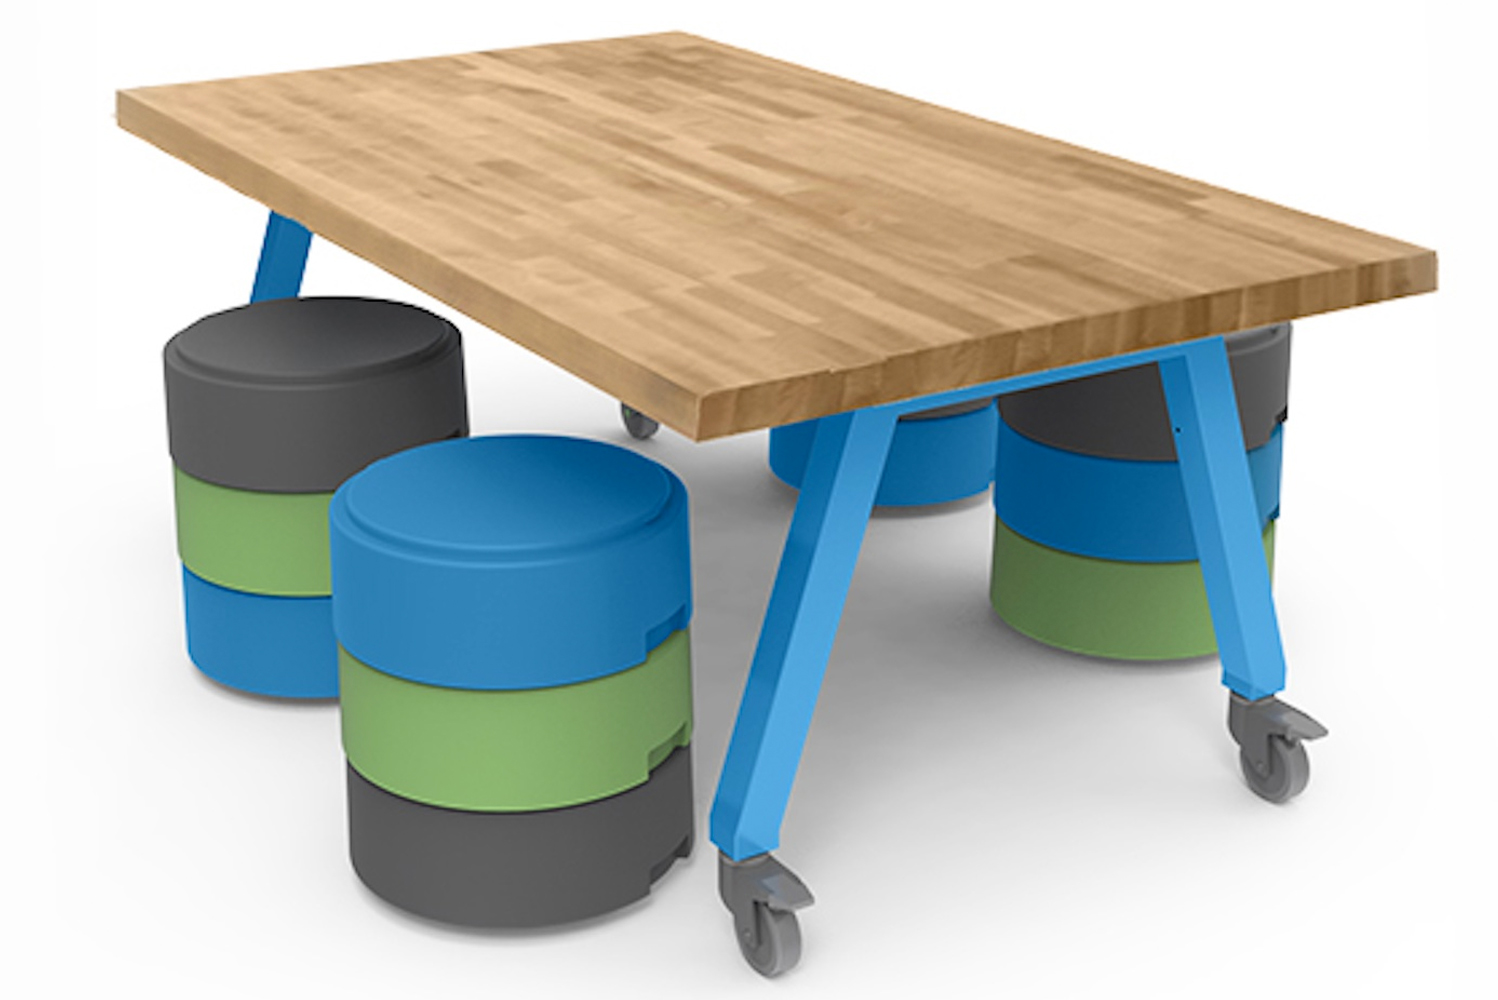 Smith System launched the Planner Studio table series 